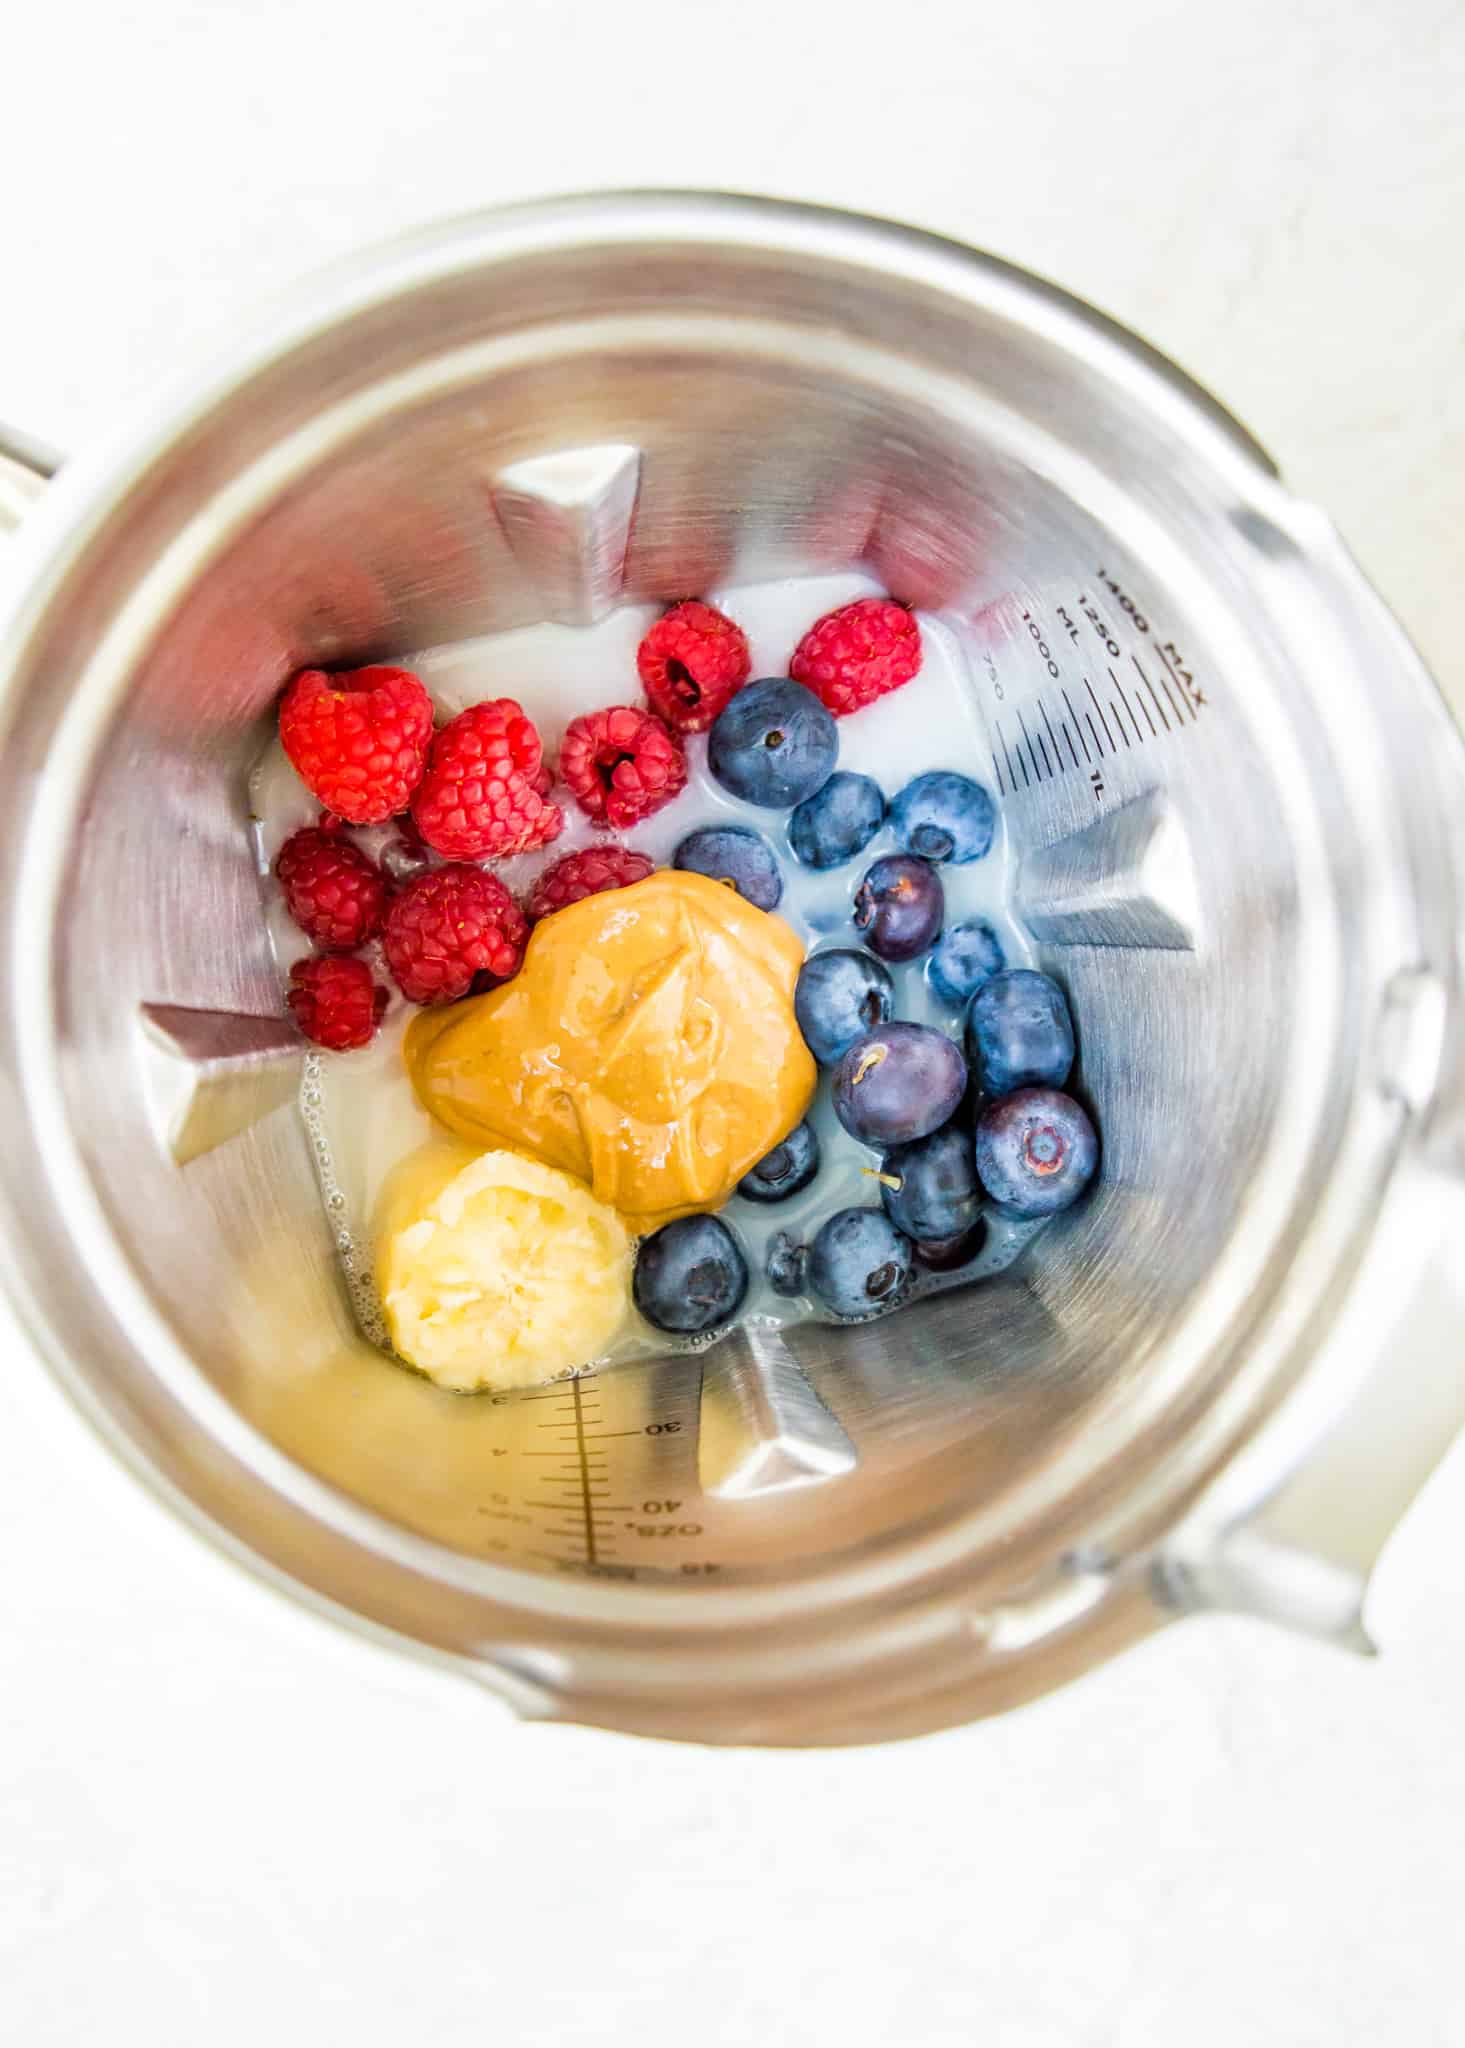 A blender with banana, blueberries, raspberries, peanut butter and oat milk in it.